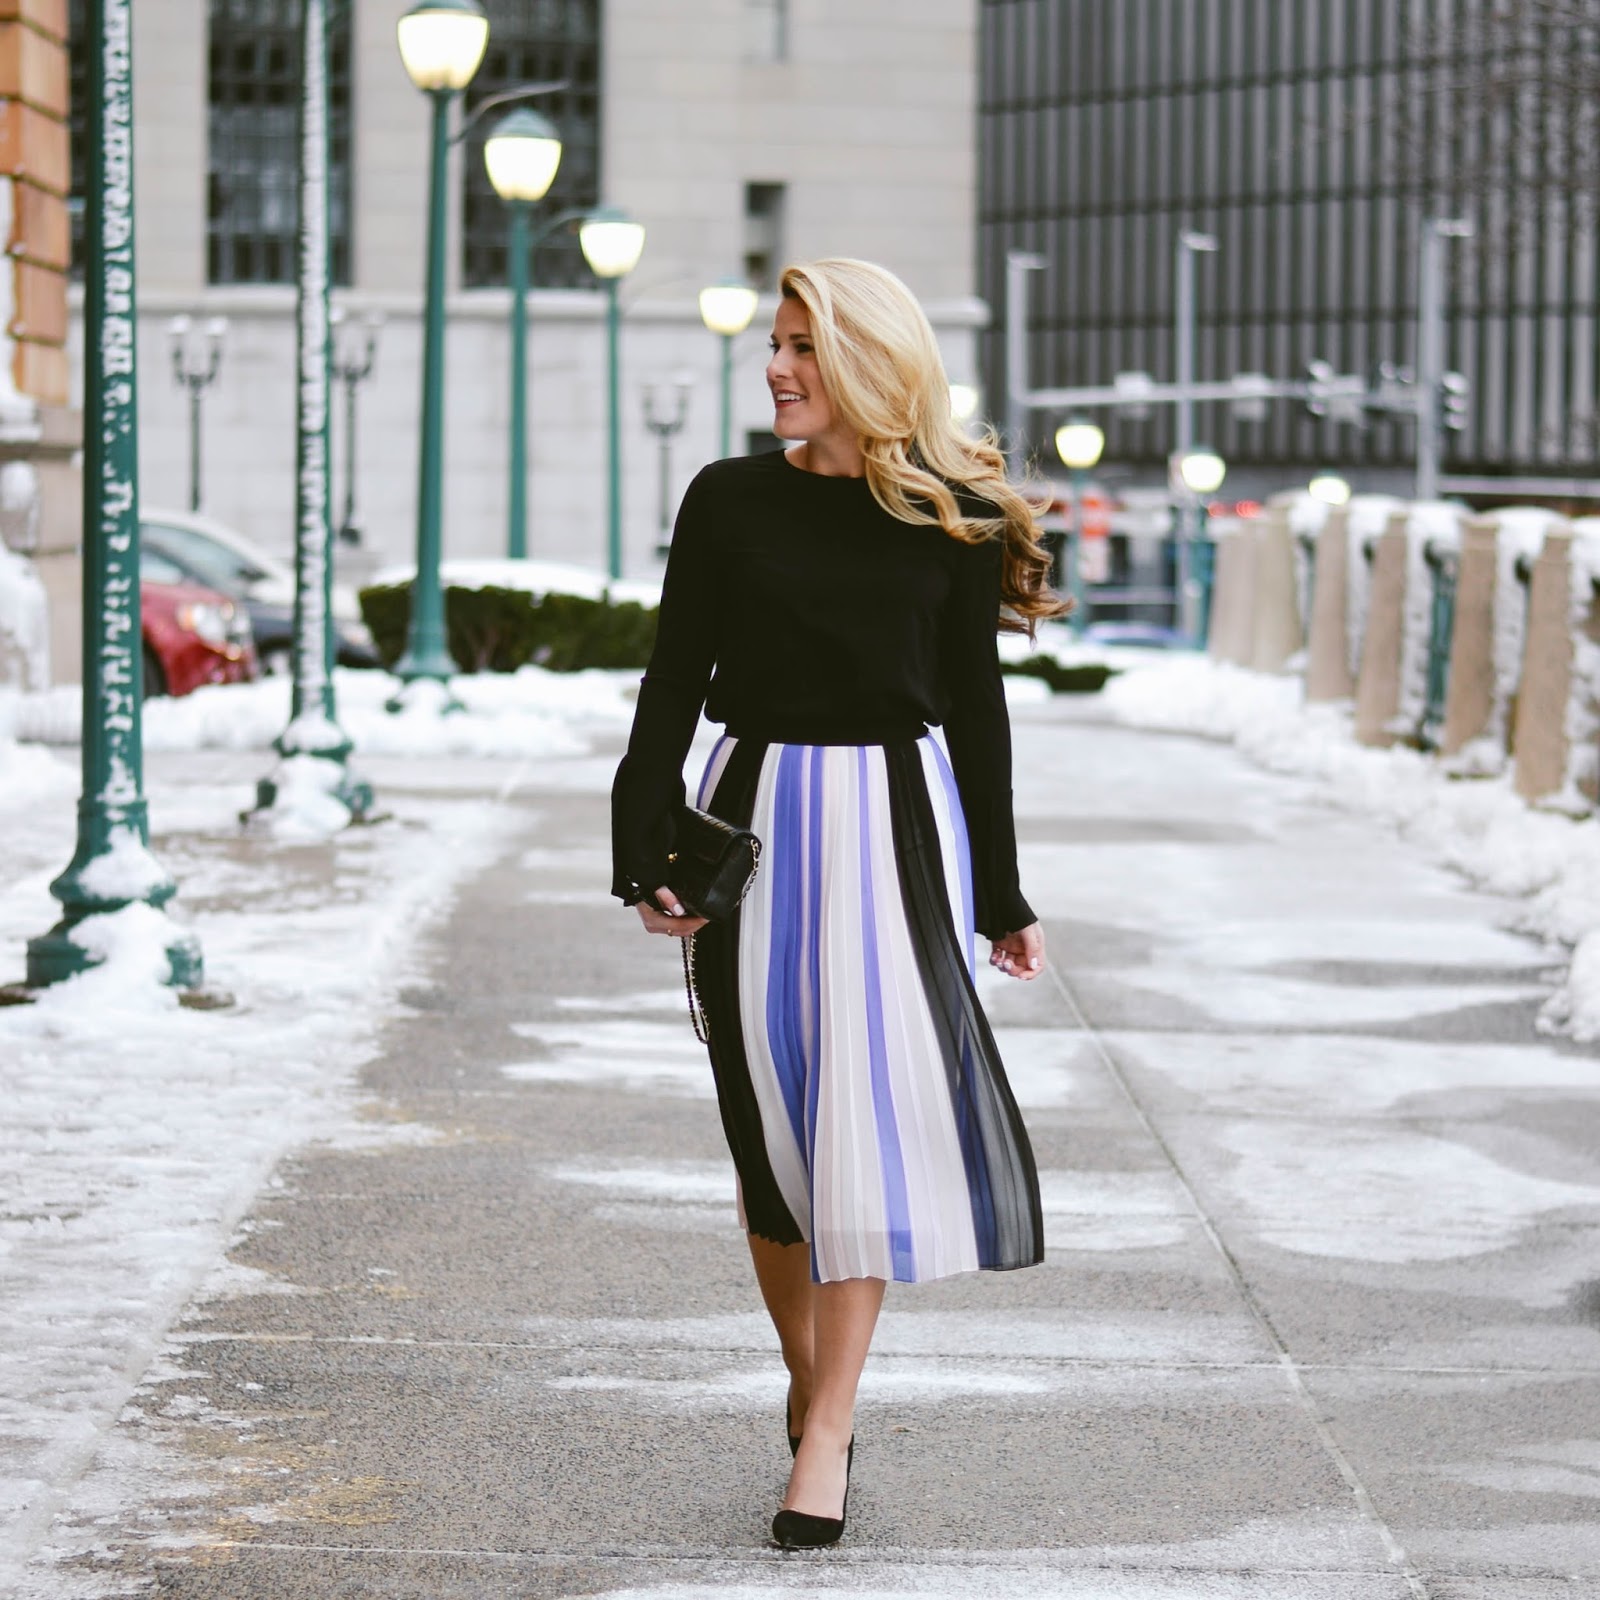 A Pink Midi Skirt Outfit - The Charming Detroiter